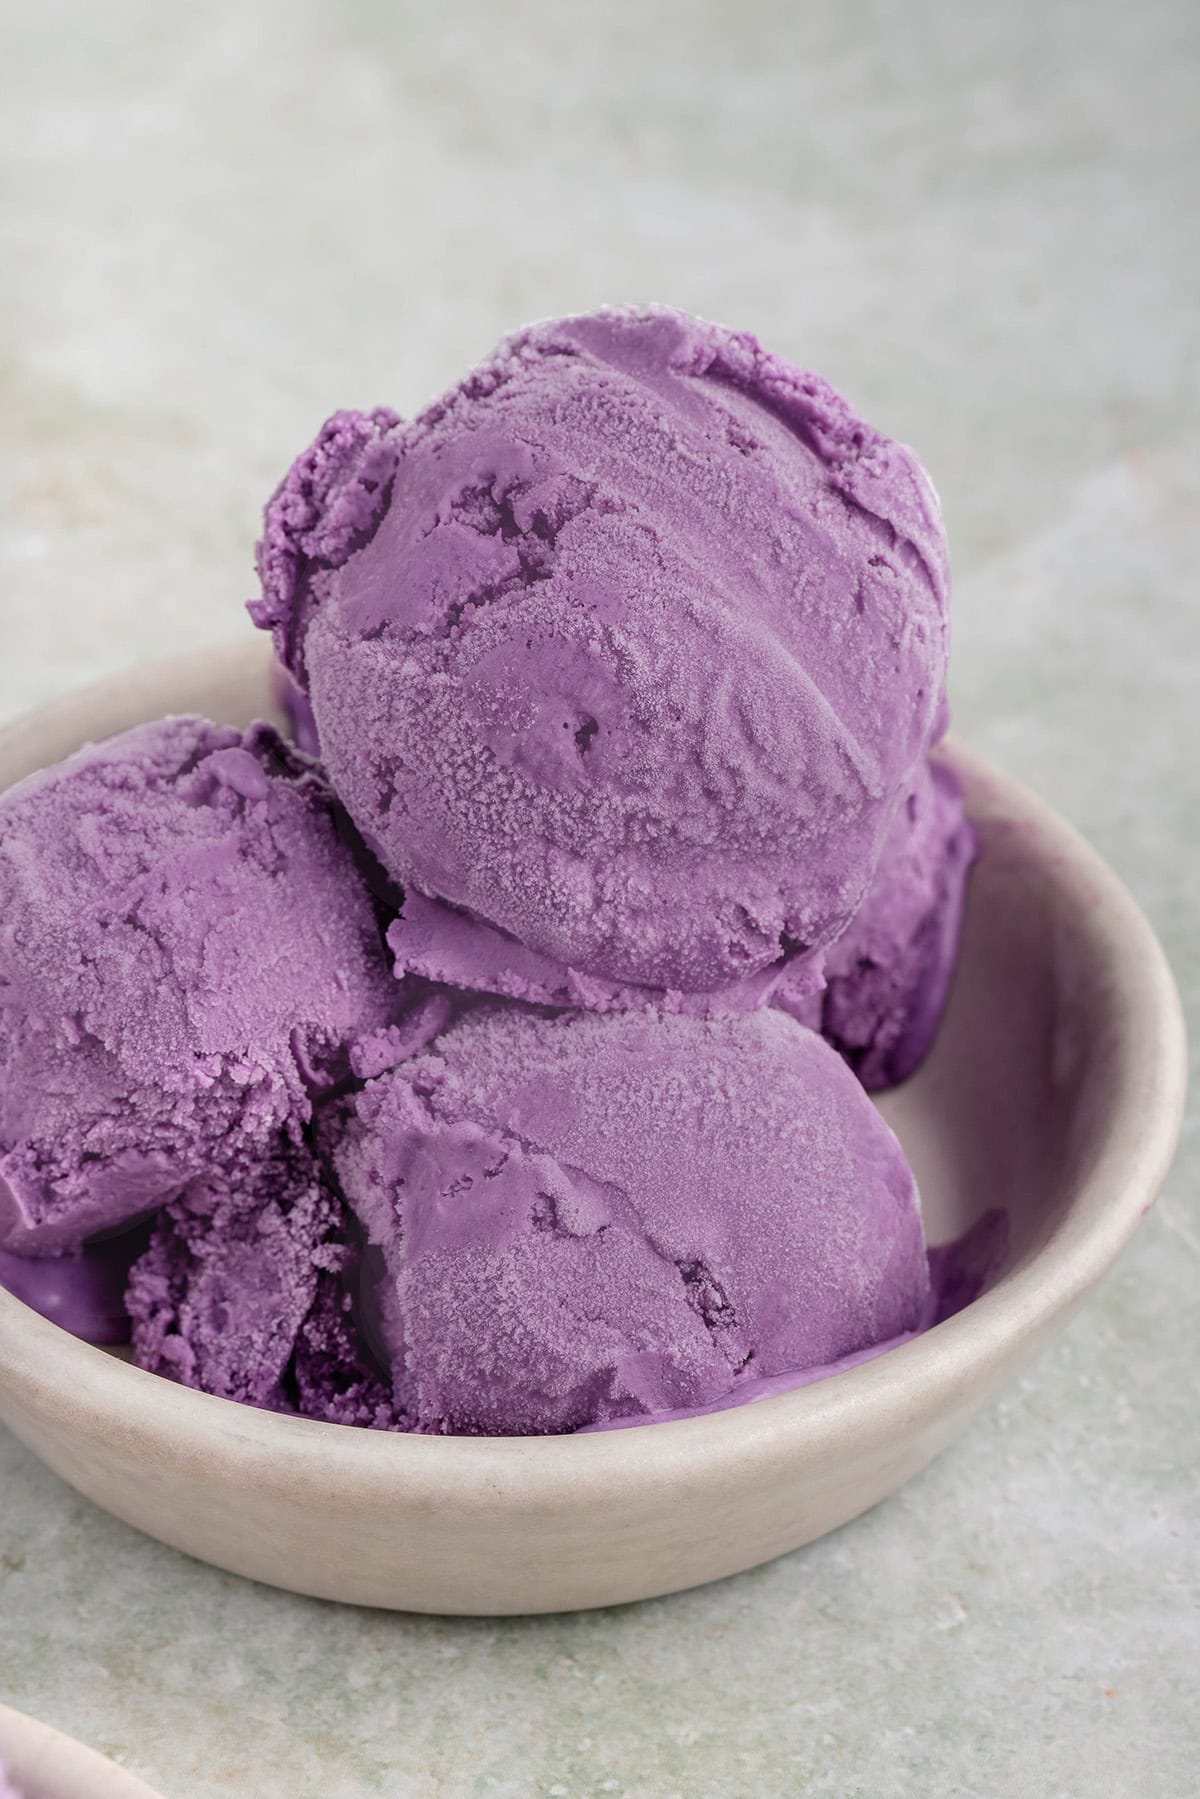 photo of scoops of purple ube ice cream in small grey bowl